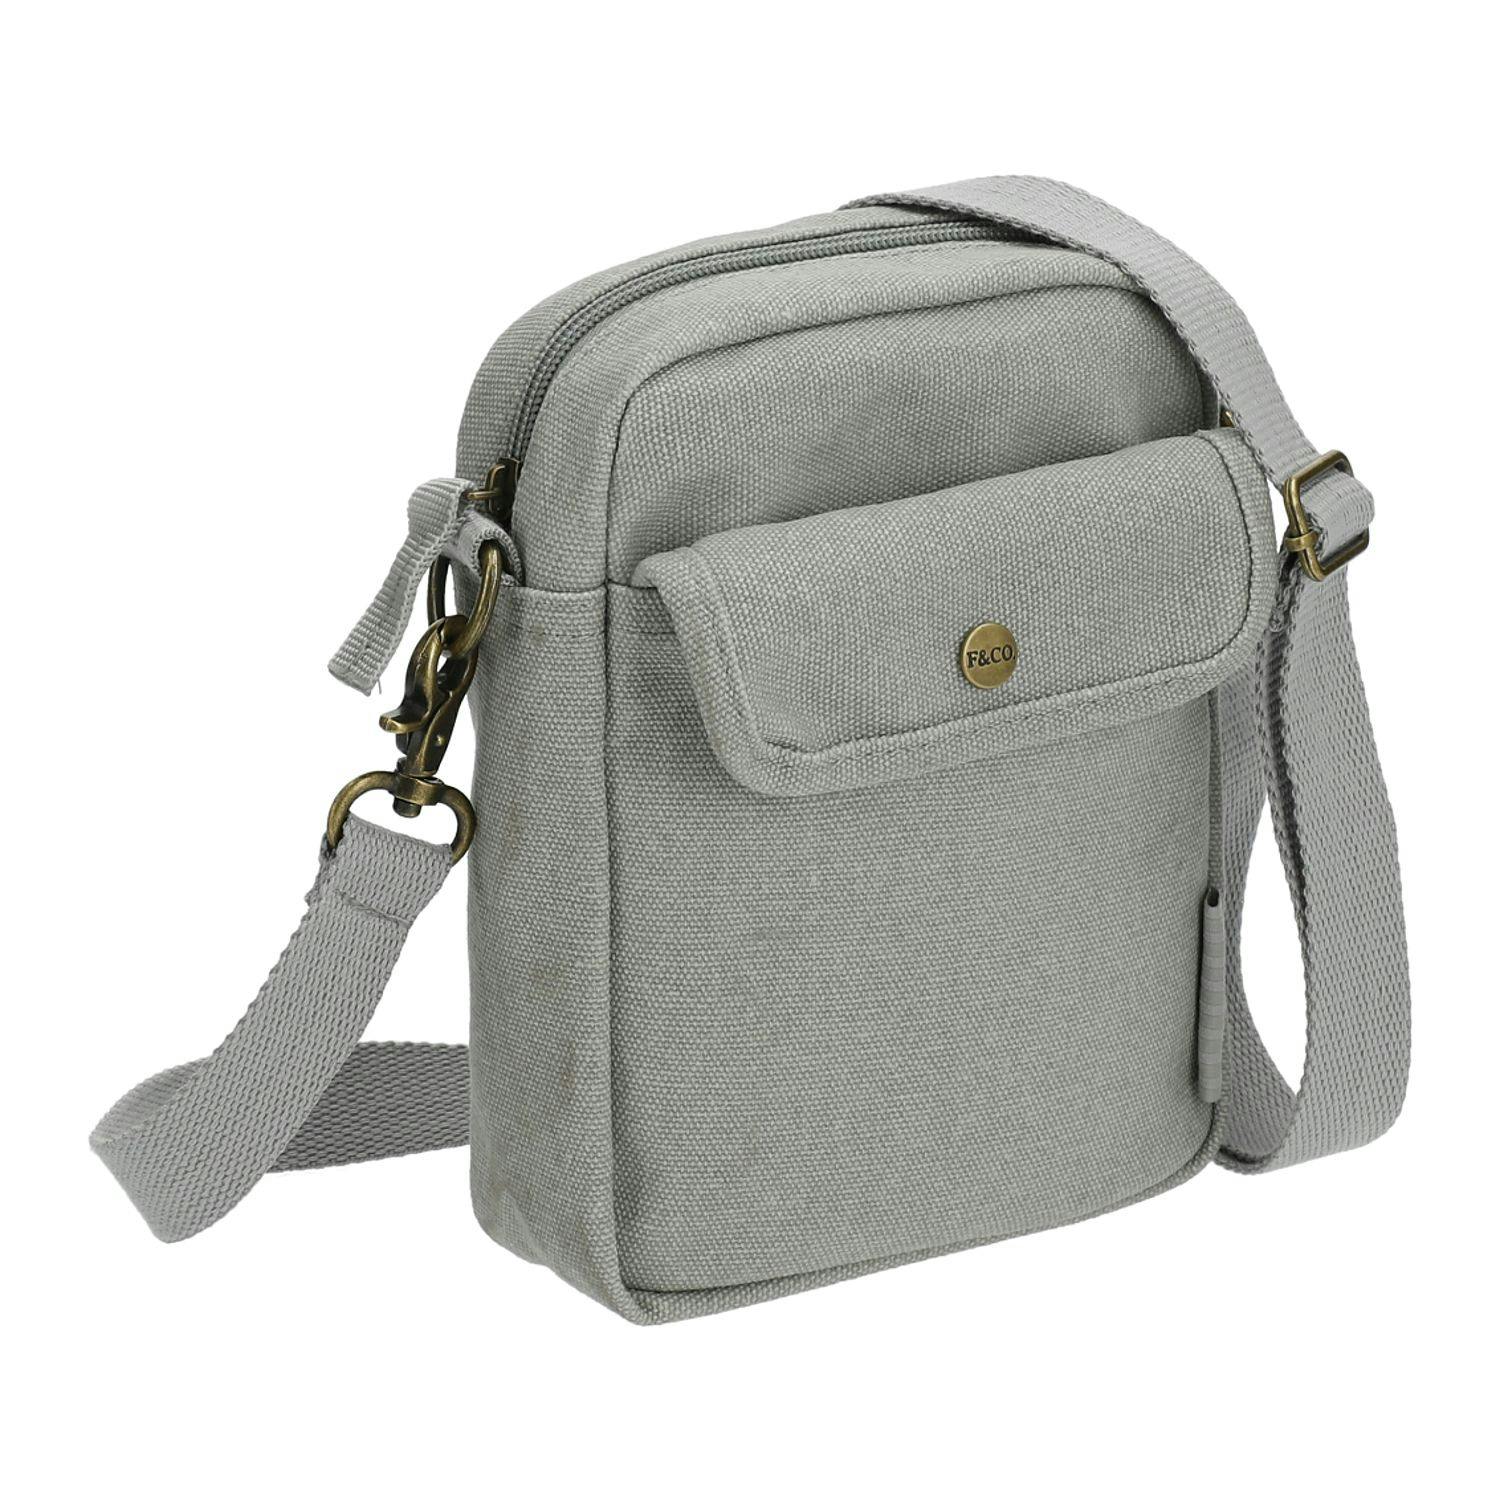 Field & Co Campus Cotton Crossbody Tote - additional Image 1